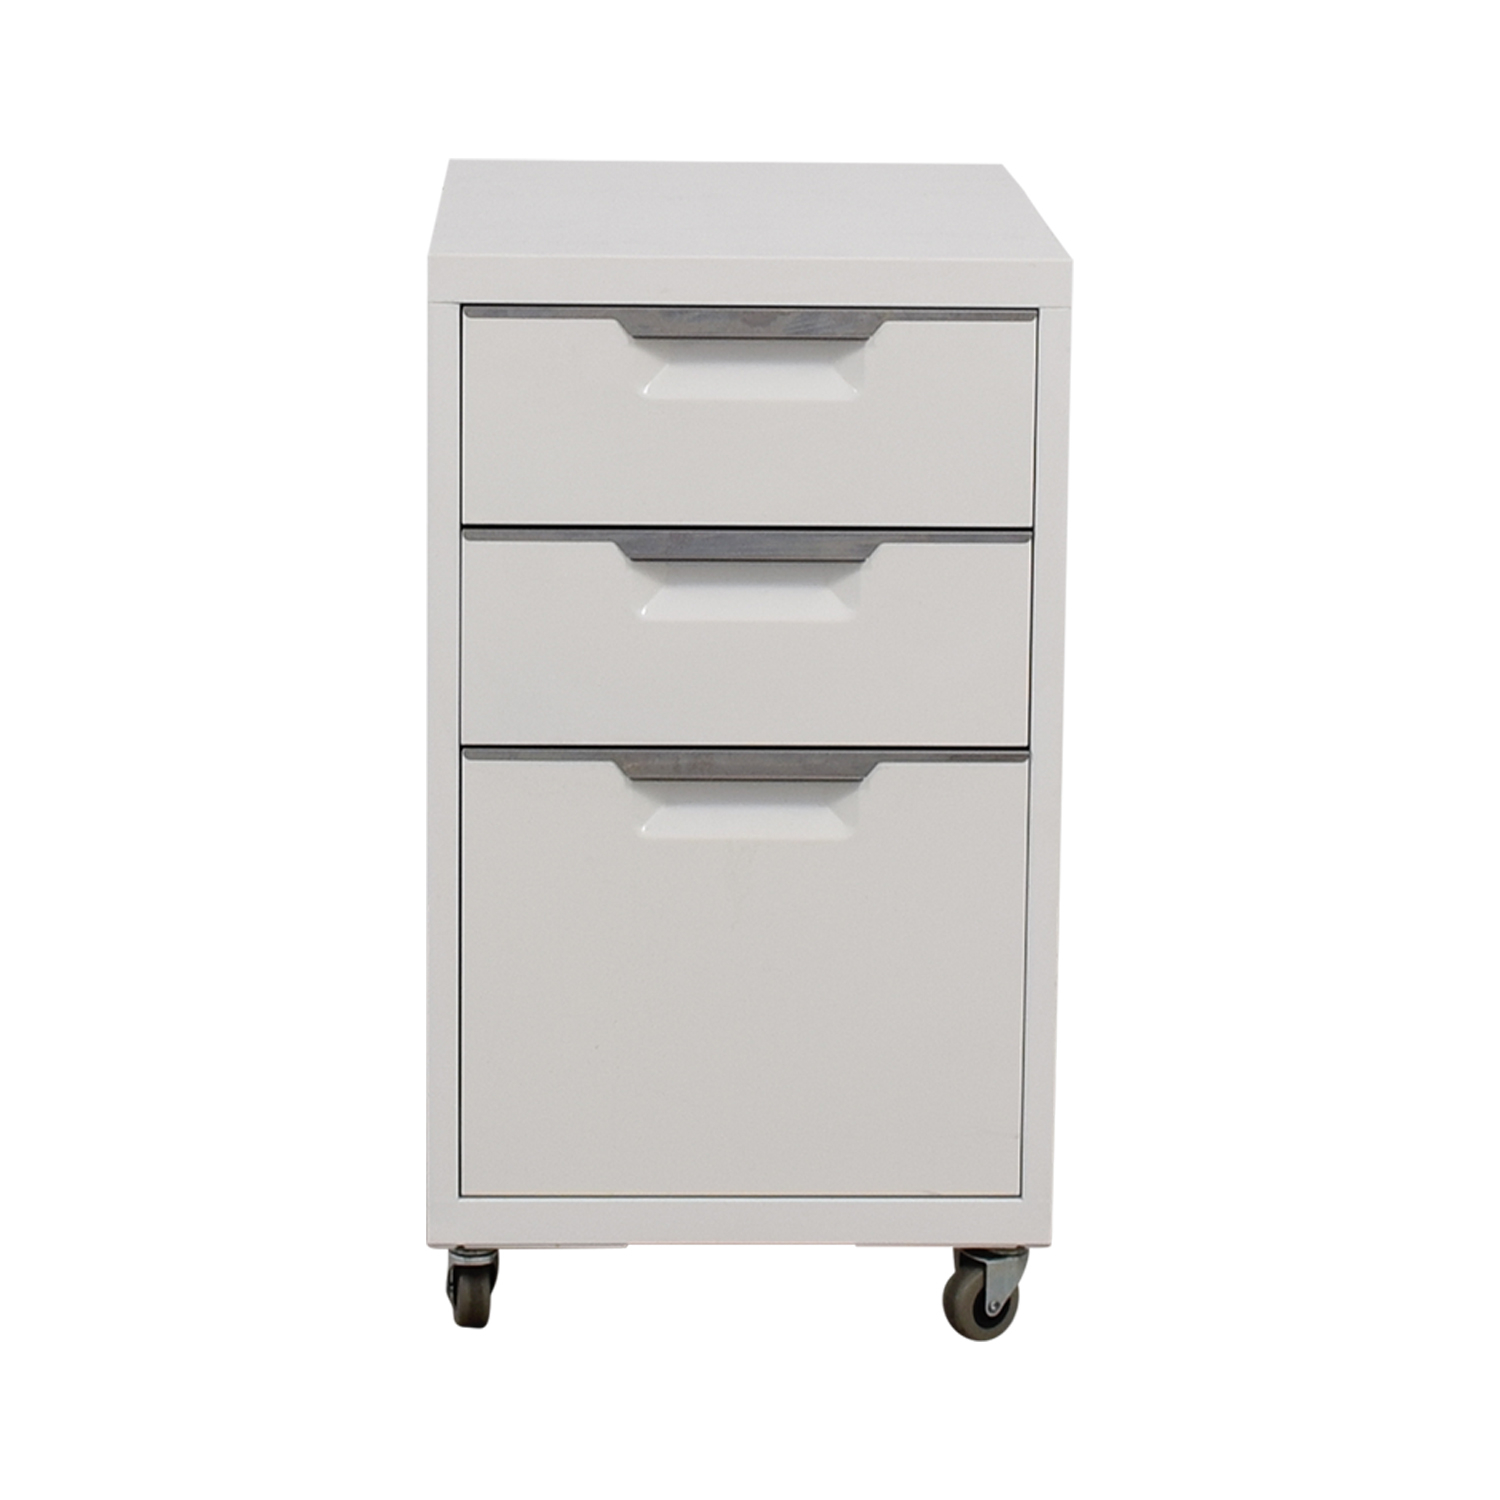 88 Off Cb2 Cb2 Tps White 3 Drawer Filing Cabinet Storage within proportions 1500 X 1500